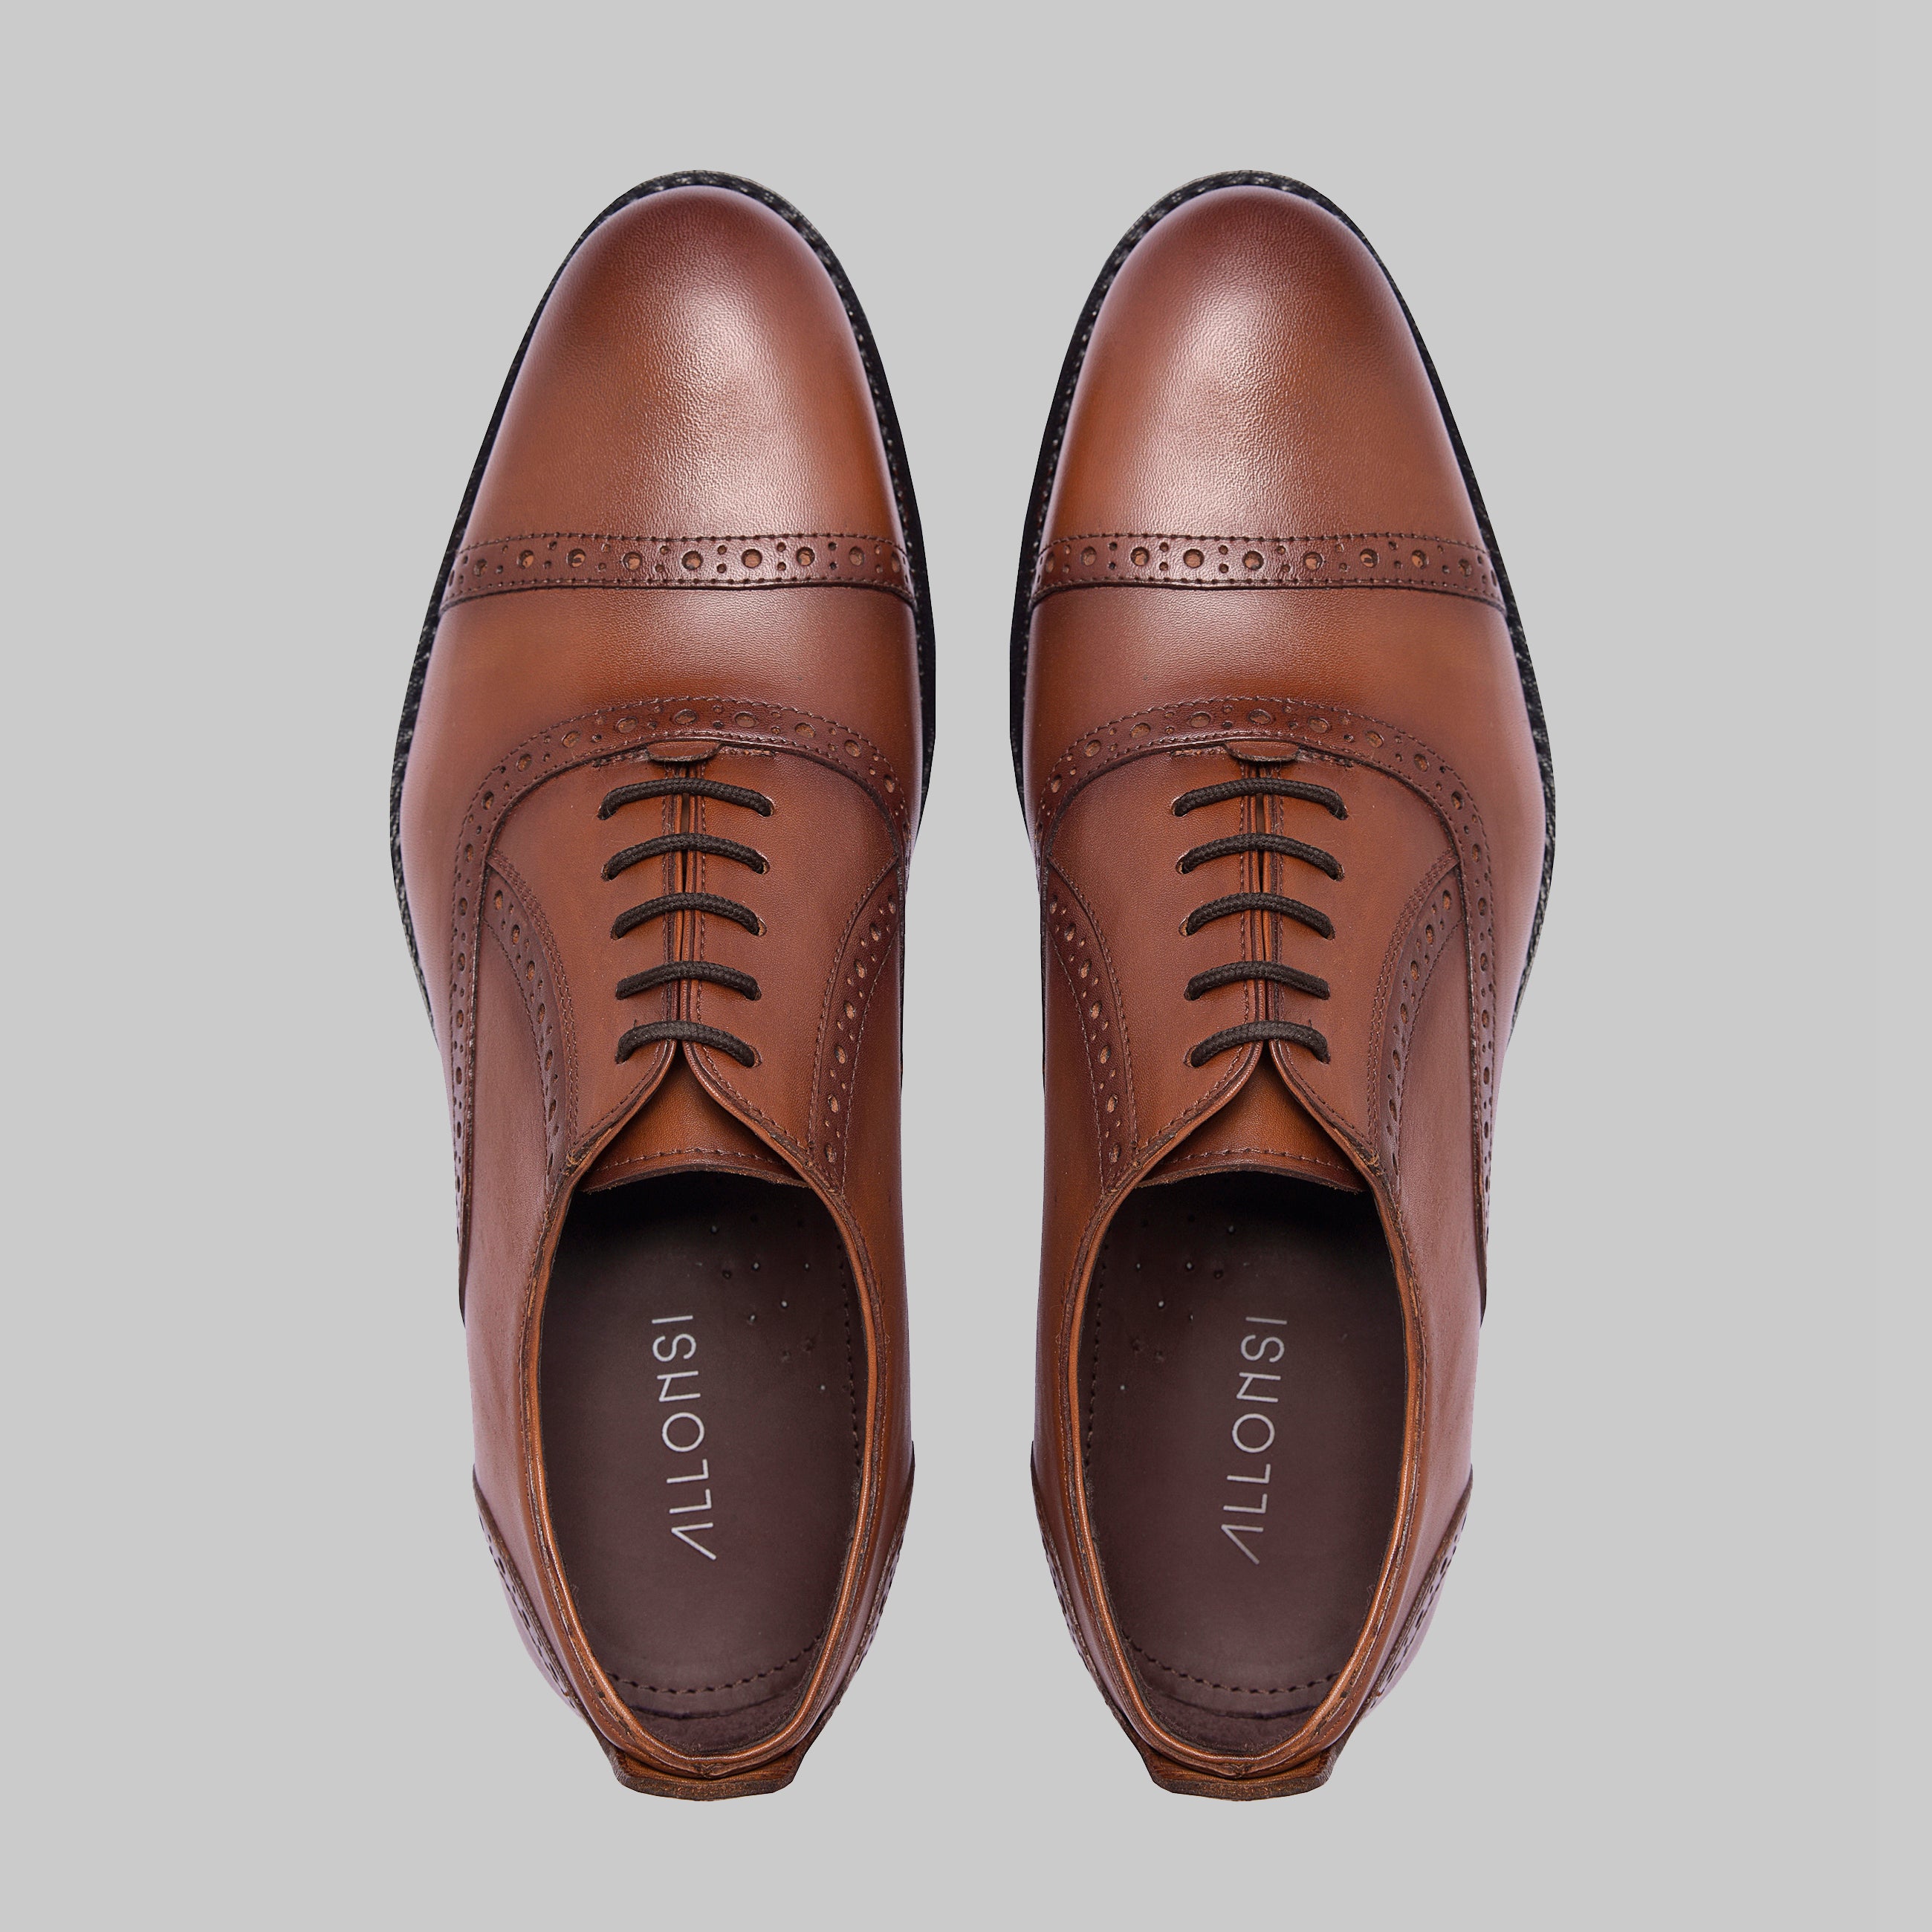 Galton Goodyear Welted Cap Toe Oxford Dress Shoes